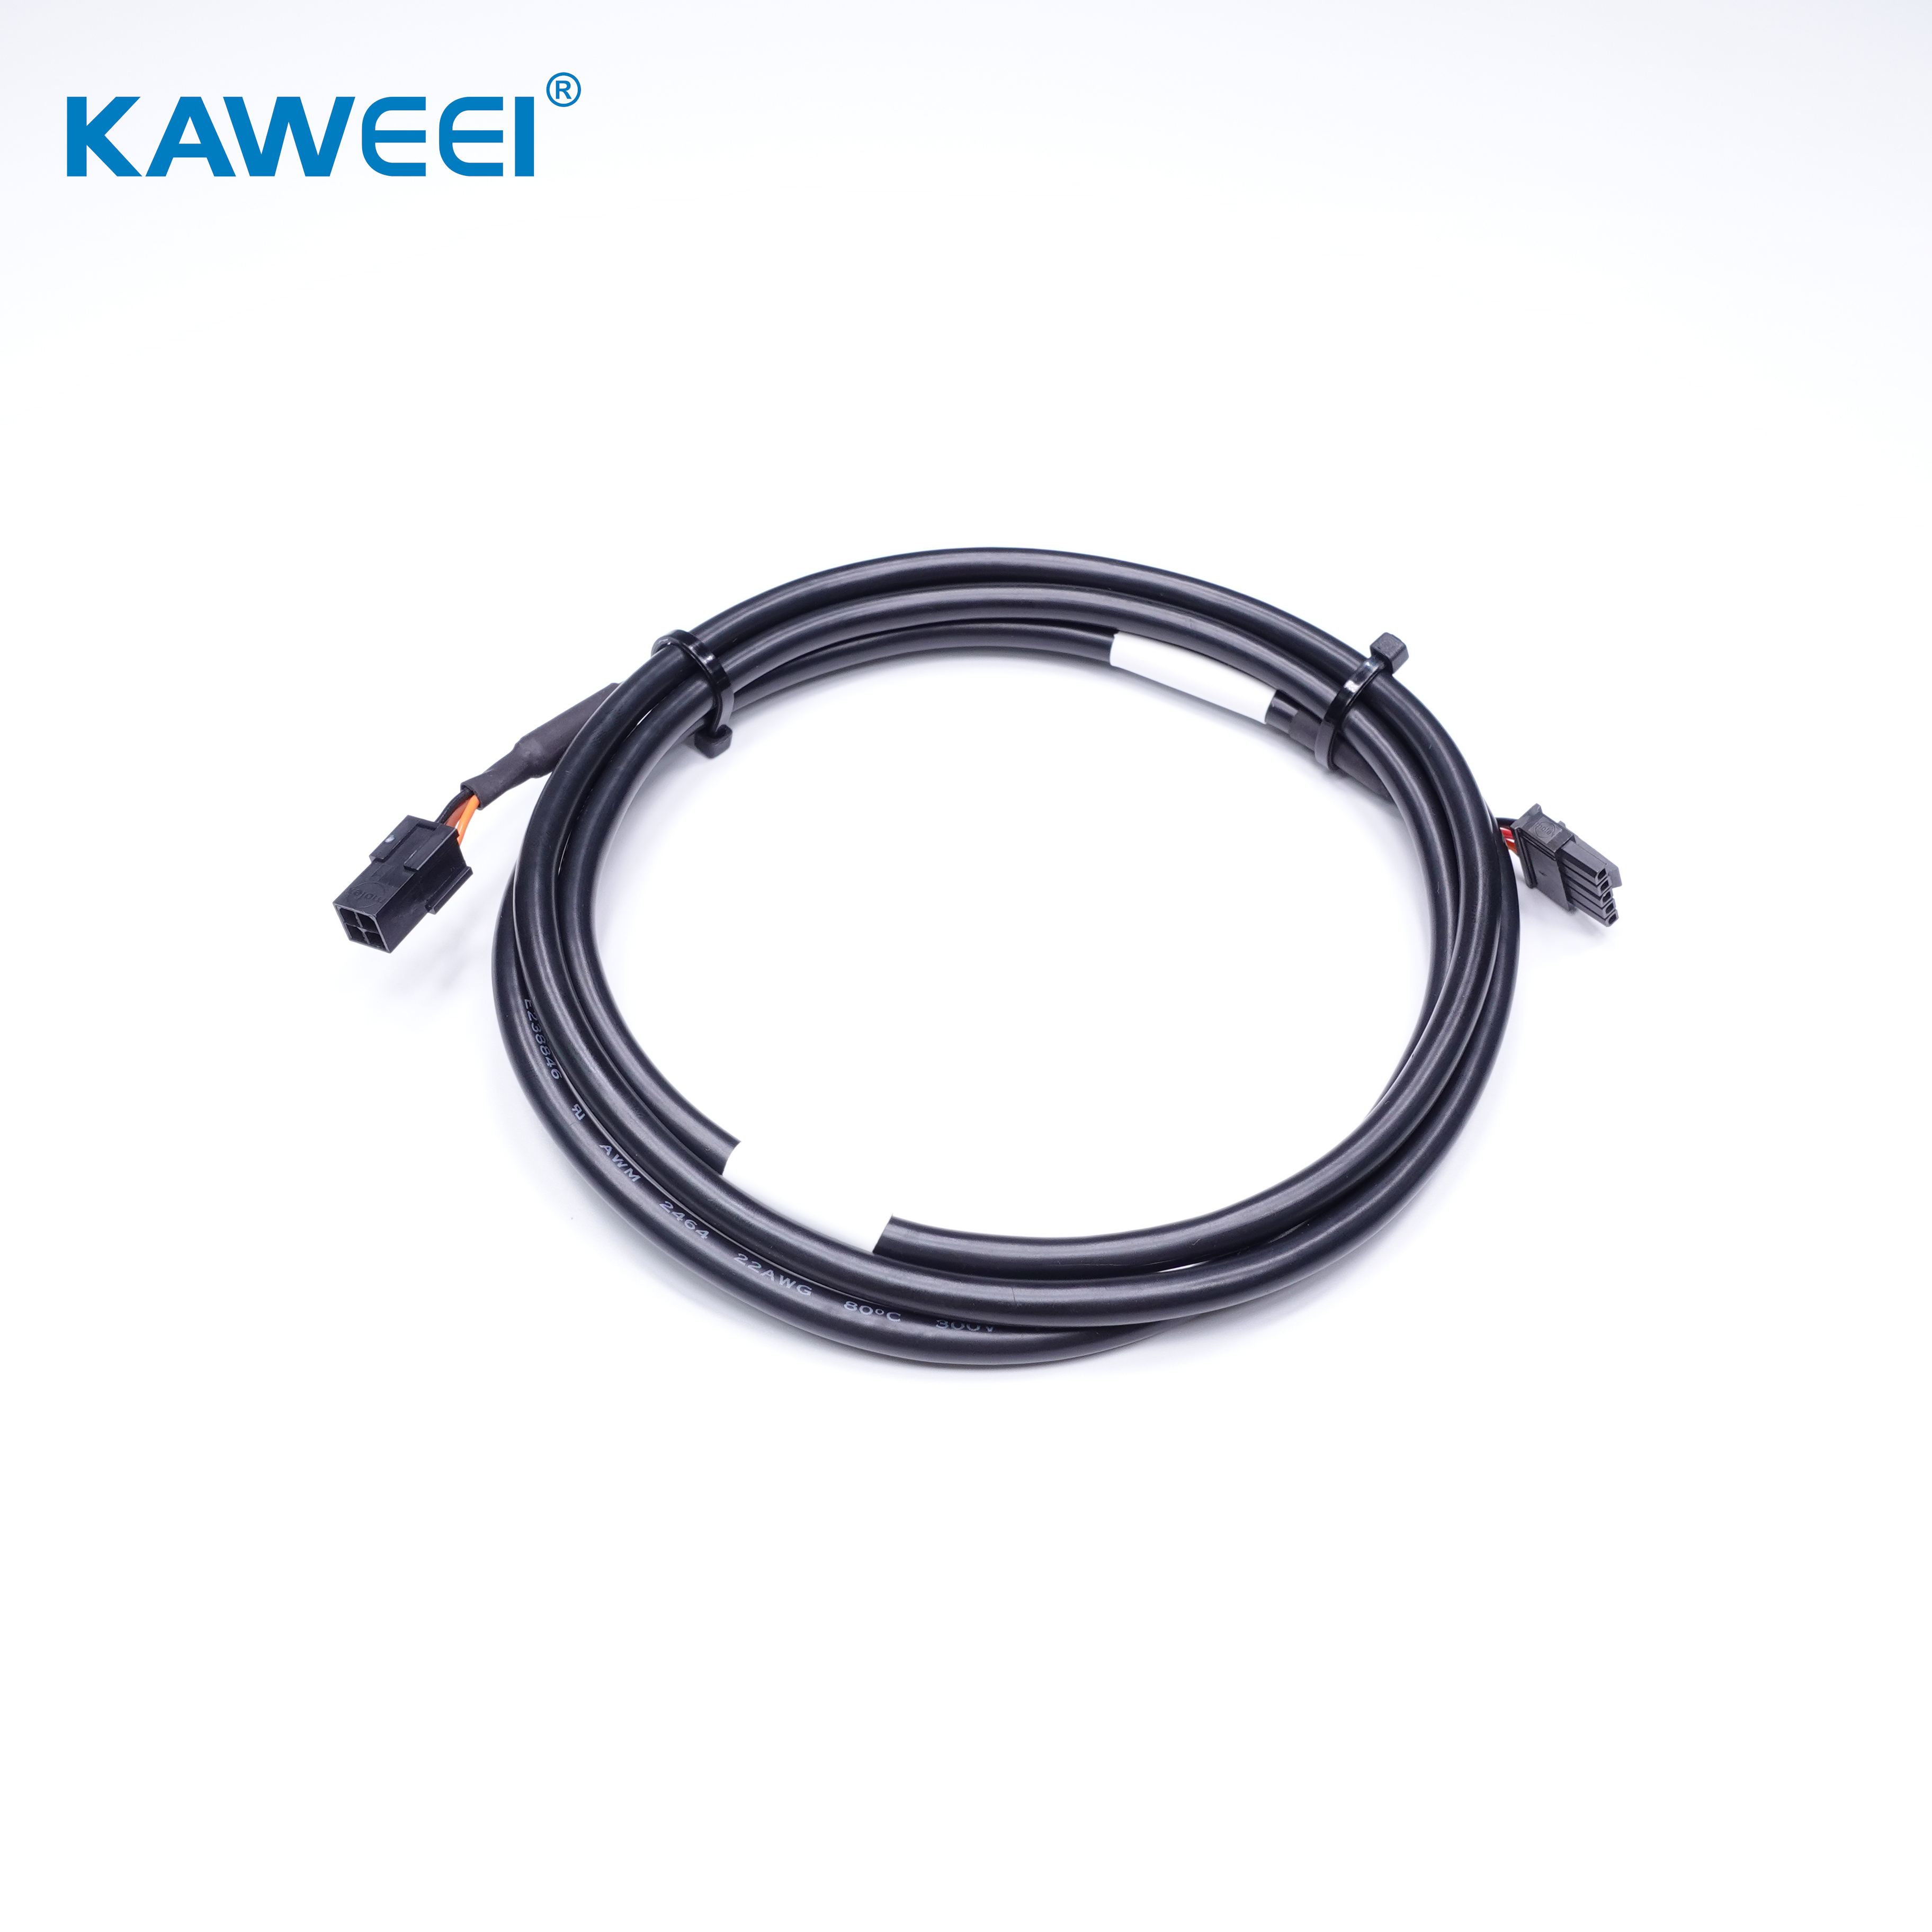 Molex 3.0mm Housing Industrial Cable Assembly Cable Extension Cable